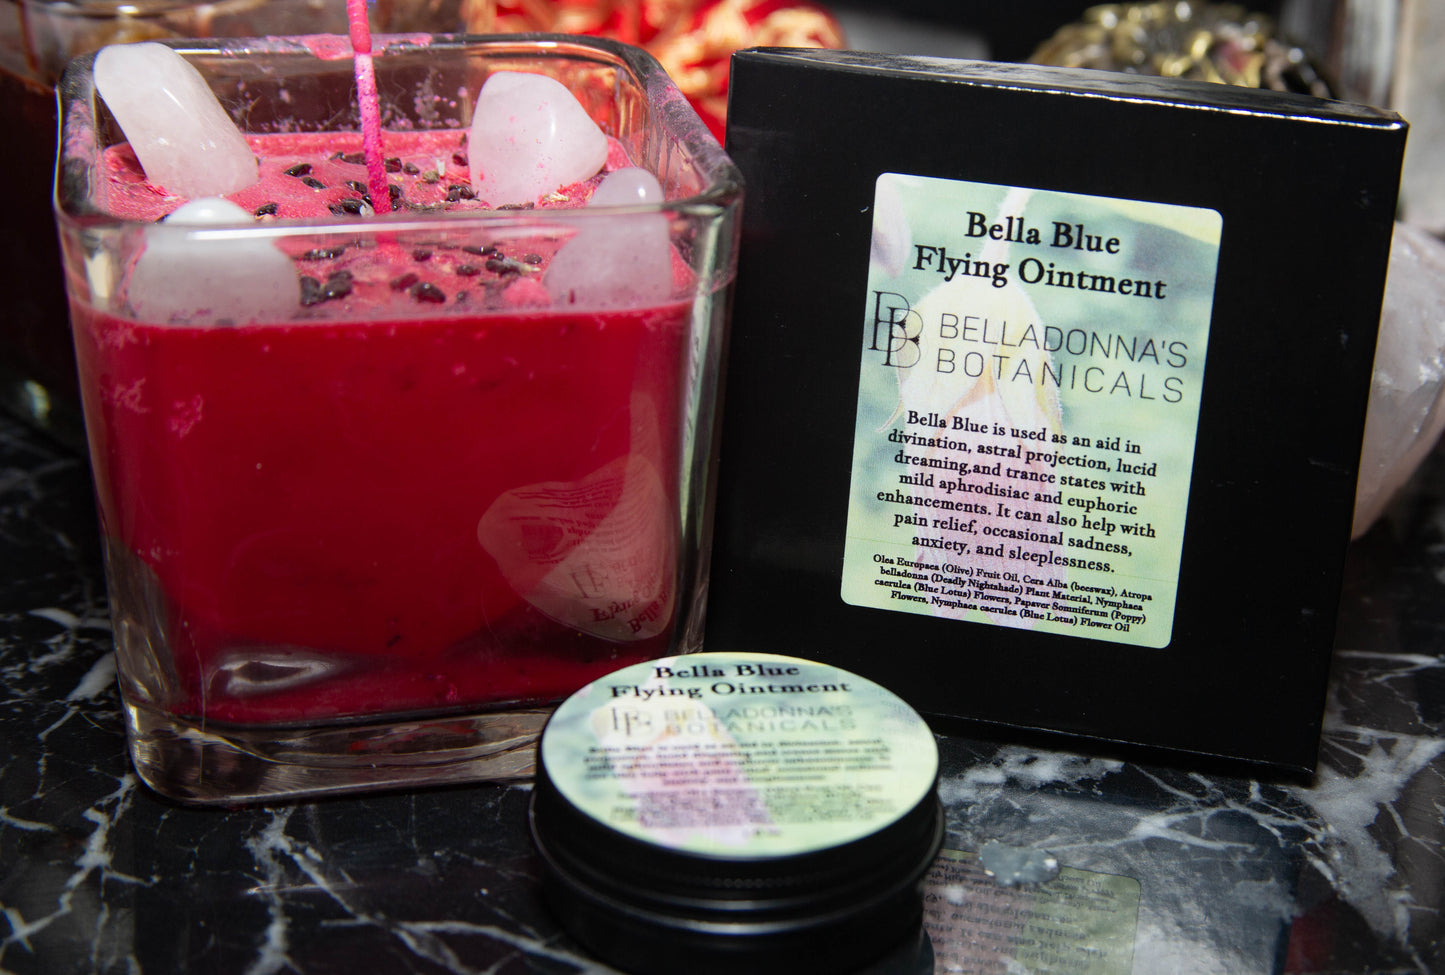 Bella Blue Flying Ointment